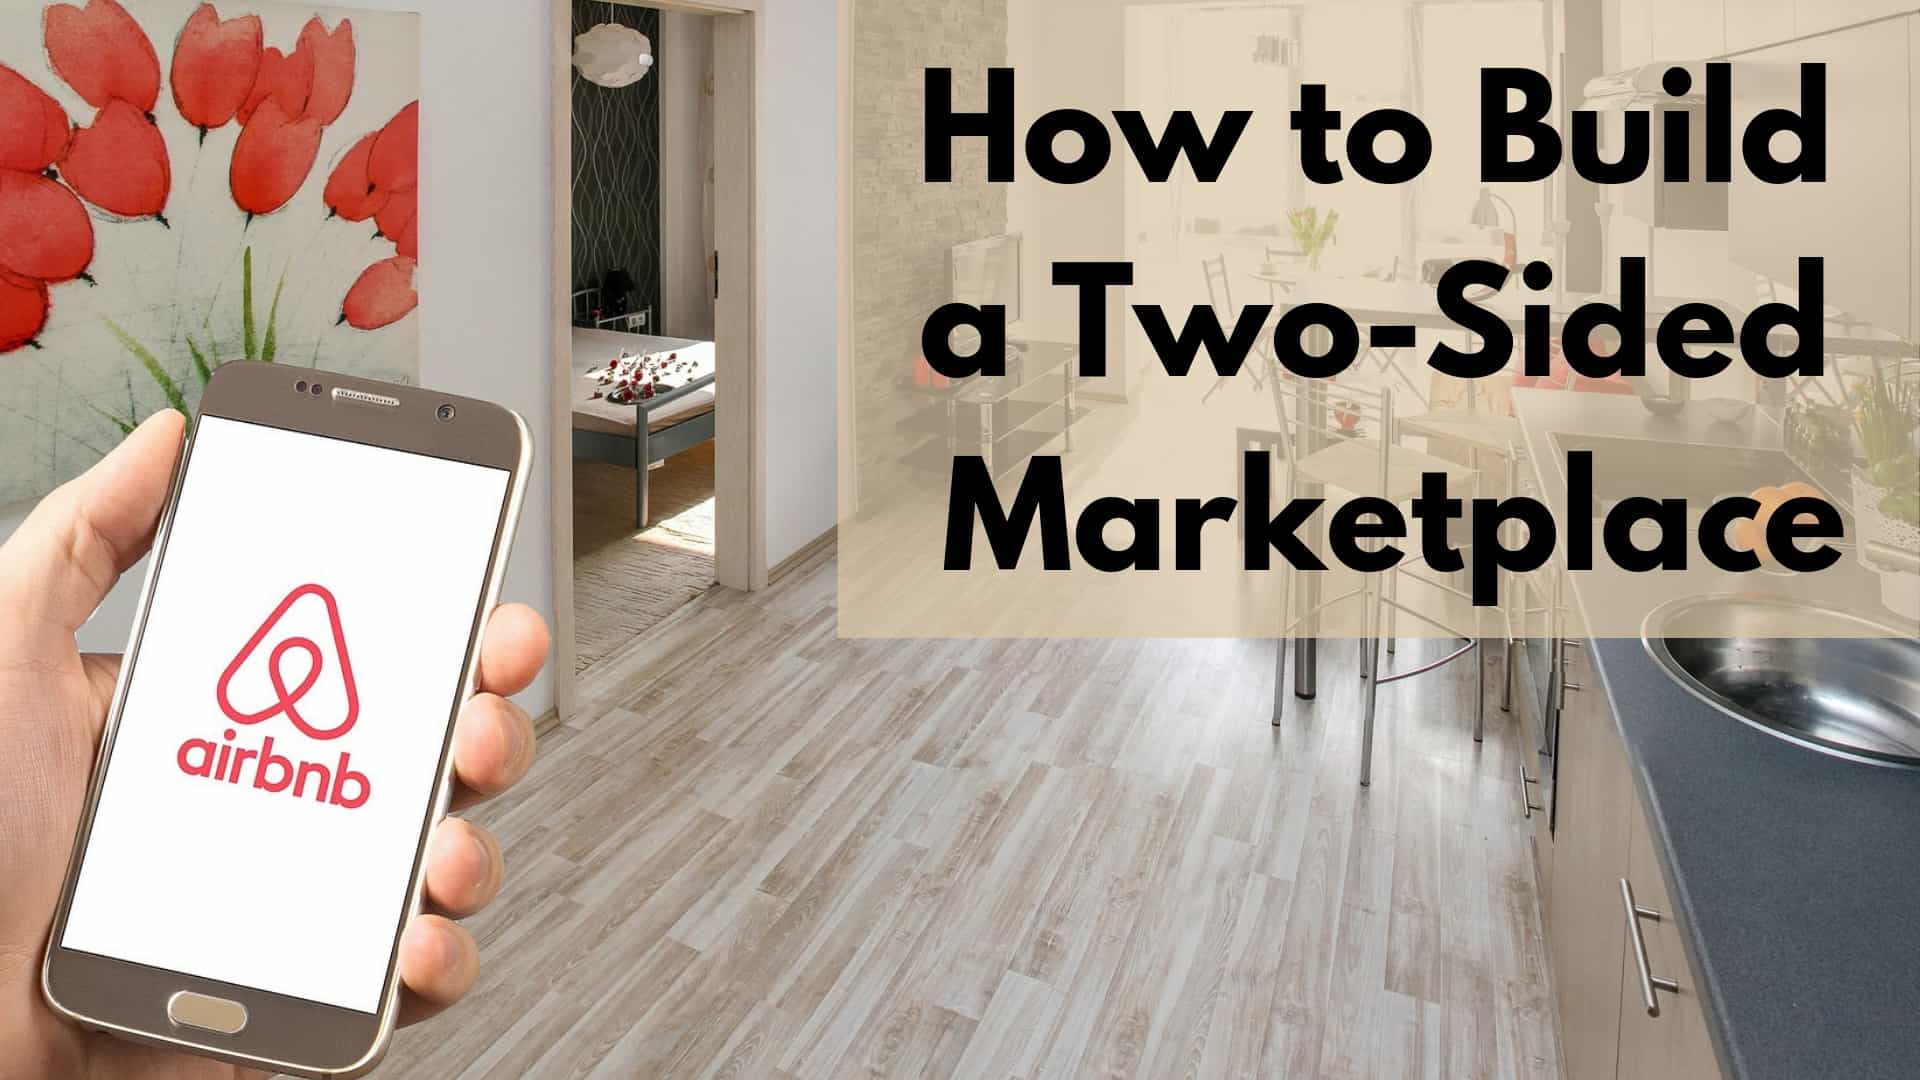 How to Build a Two-Sided Marketplace